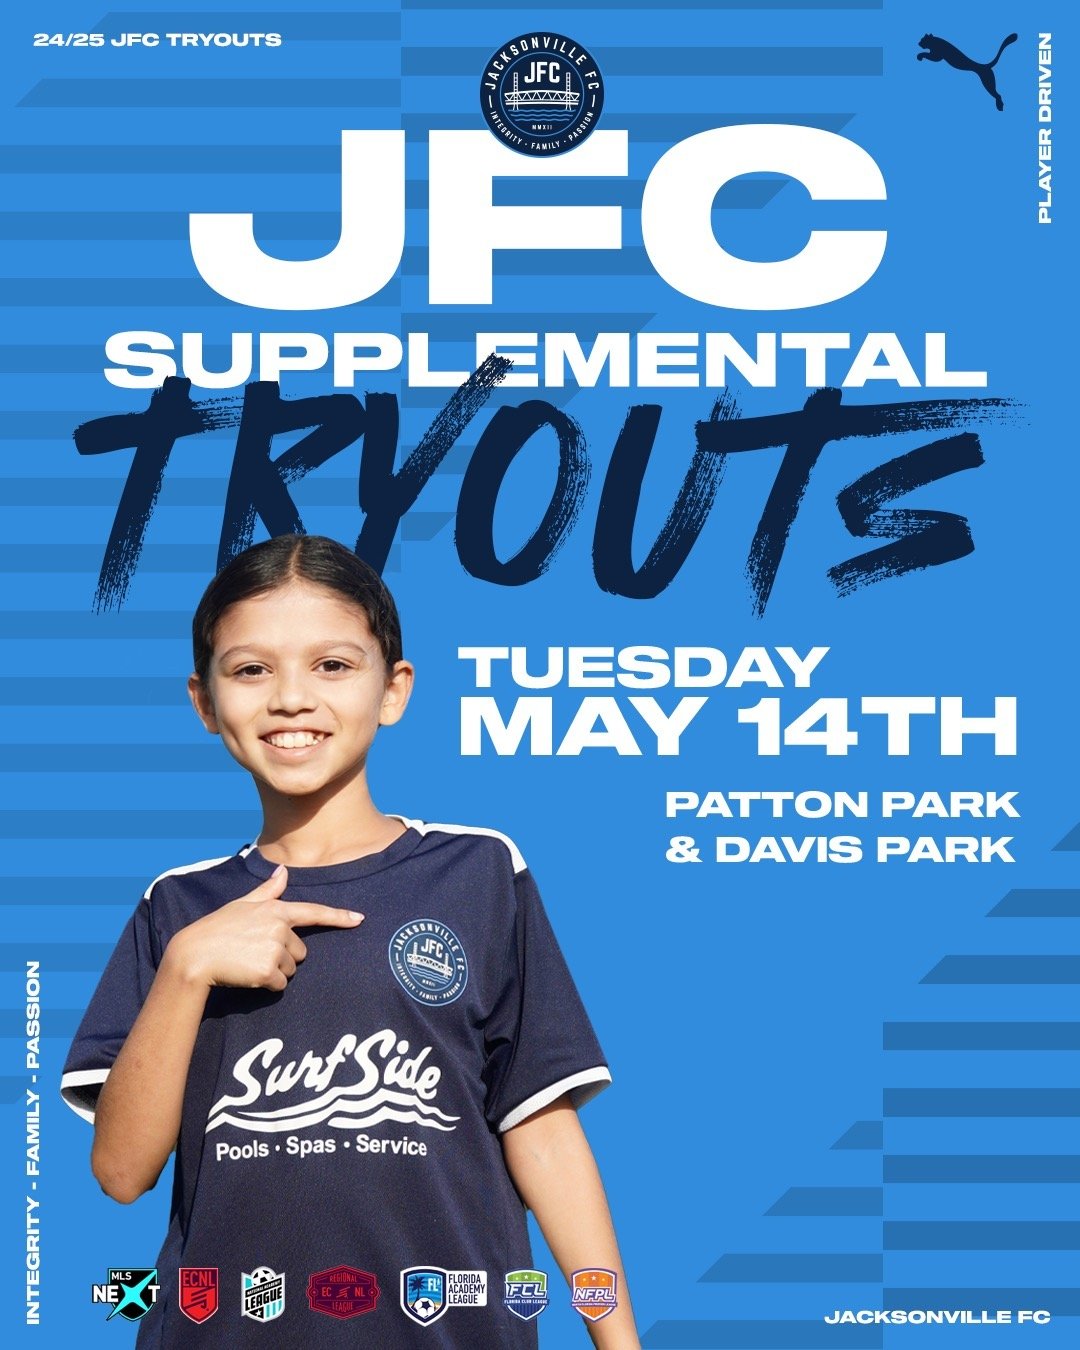 Found out about Jacksonville FC too late or missed our regular tryouts? Want to tryout again? There&rsquo;s still a way to join the club.

Our Supplemental Tryouts will allow players the opportunity to play and showcase their soccer skills in front o